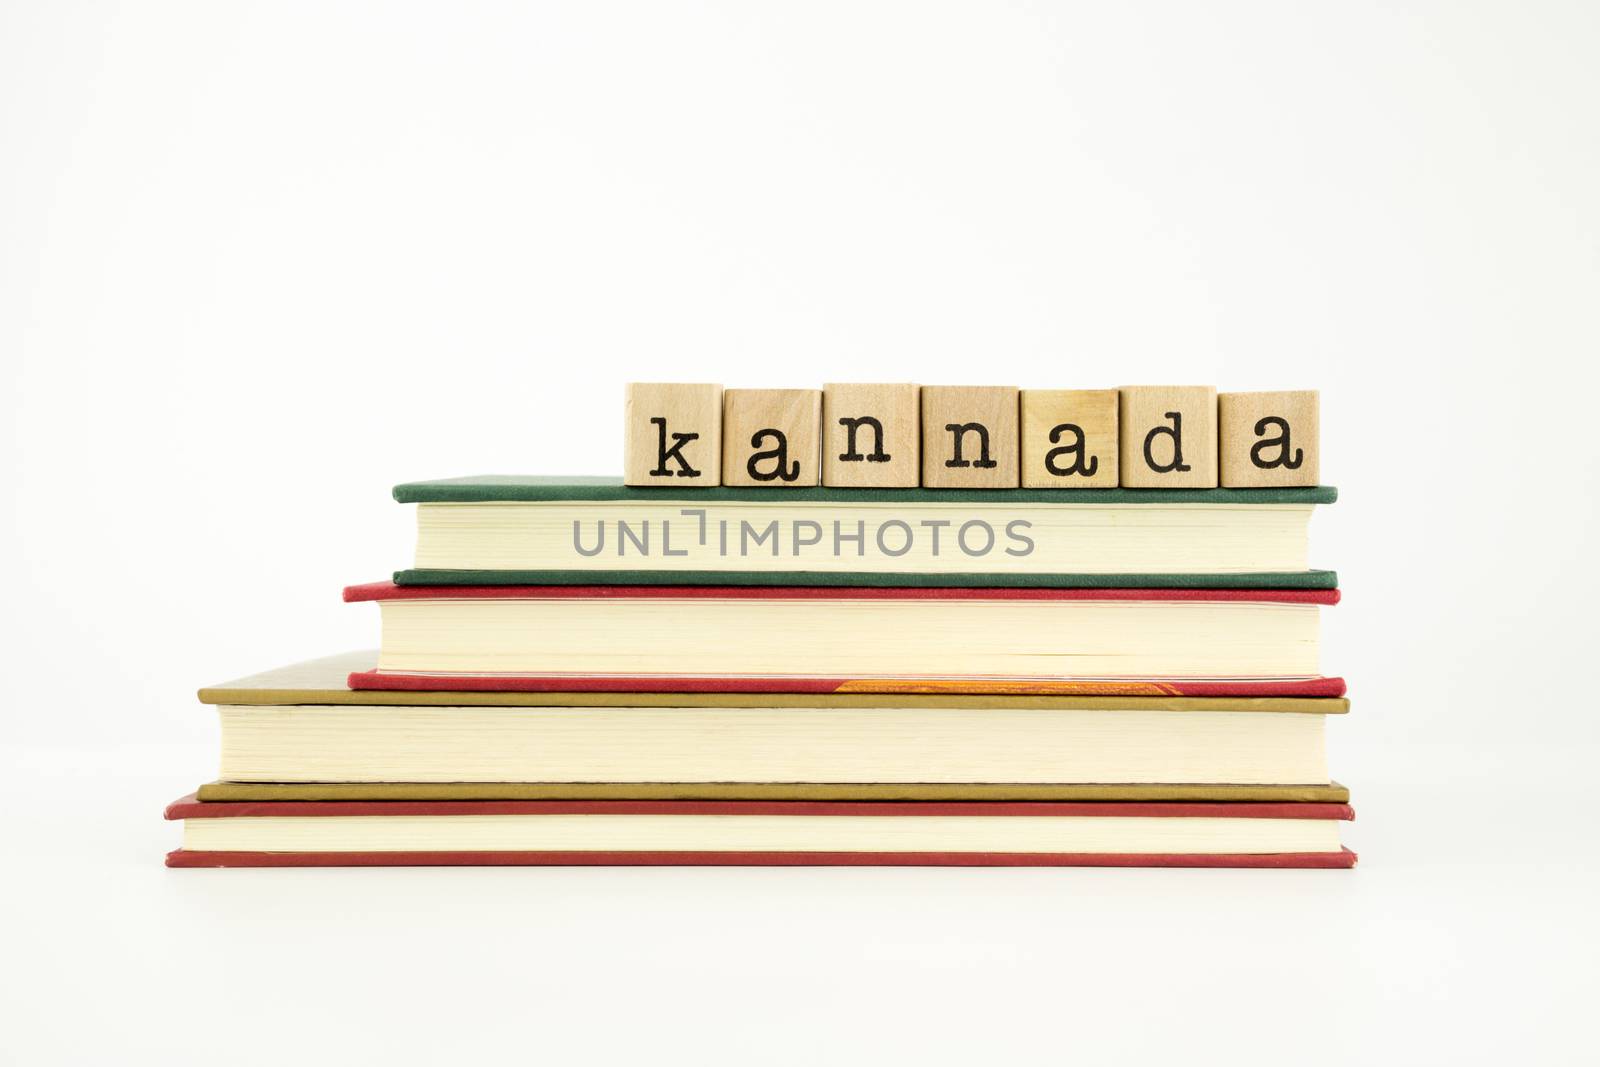 kannada language word on wood stamps and books by vinnstock